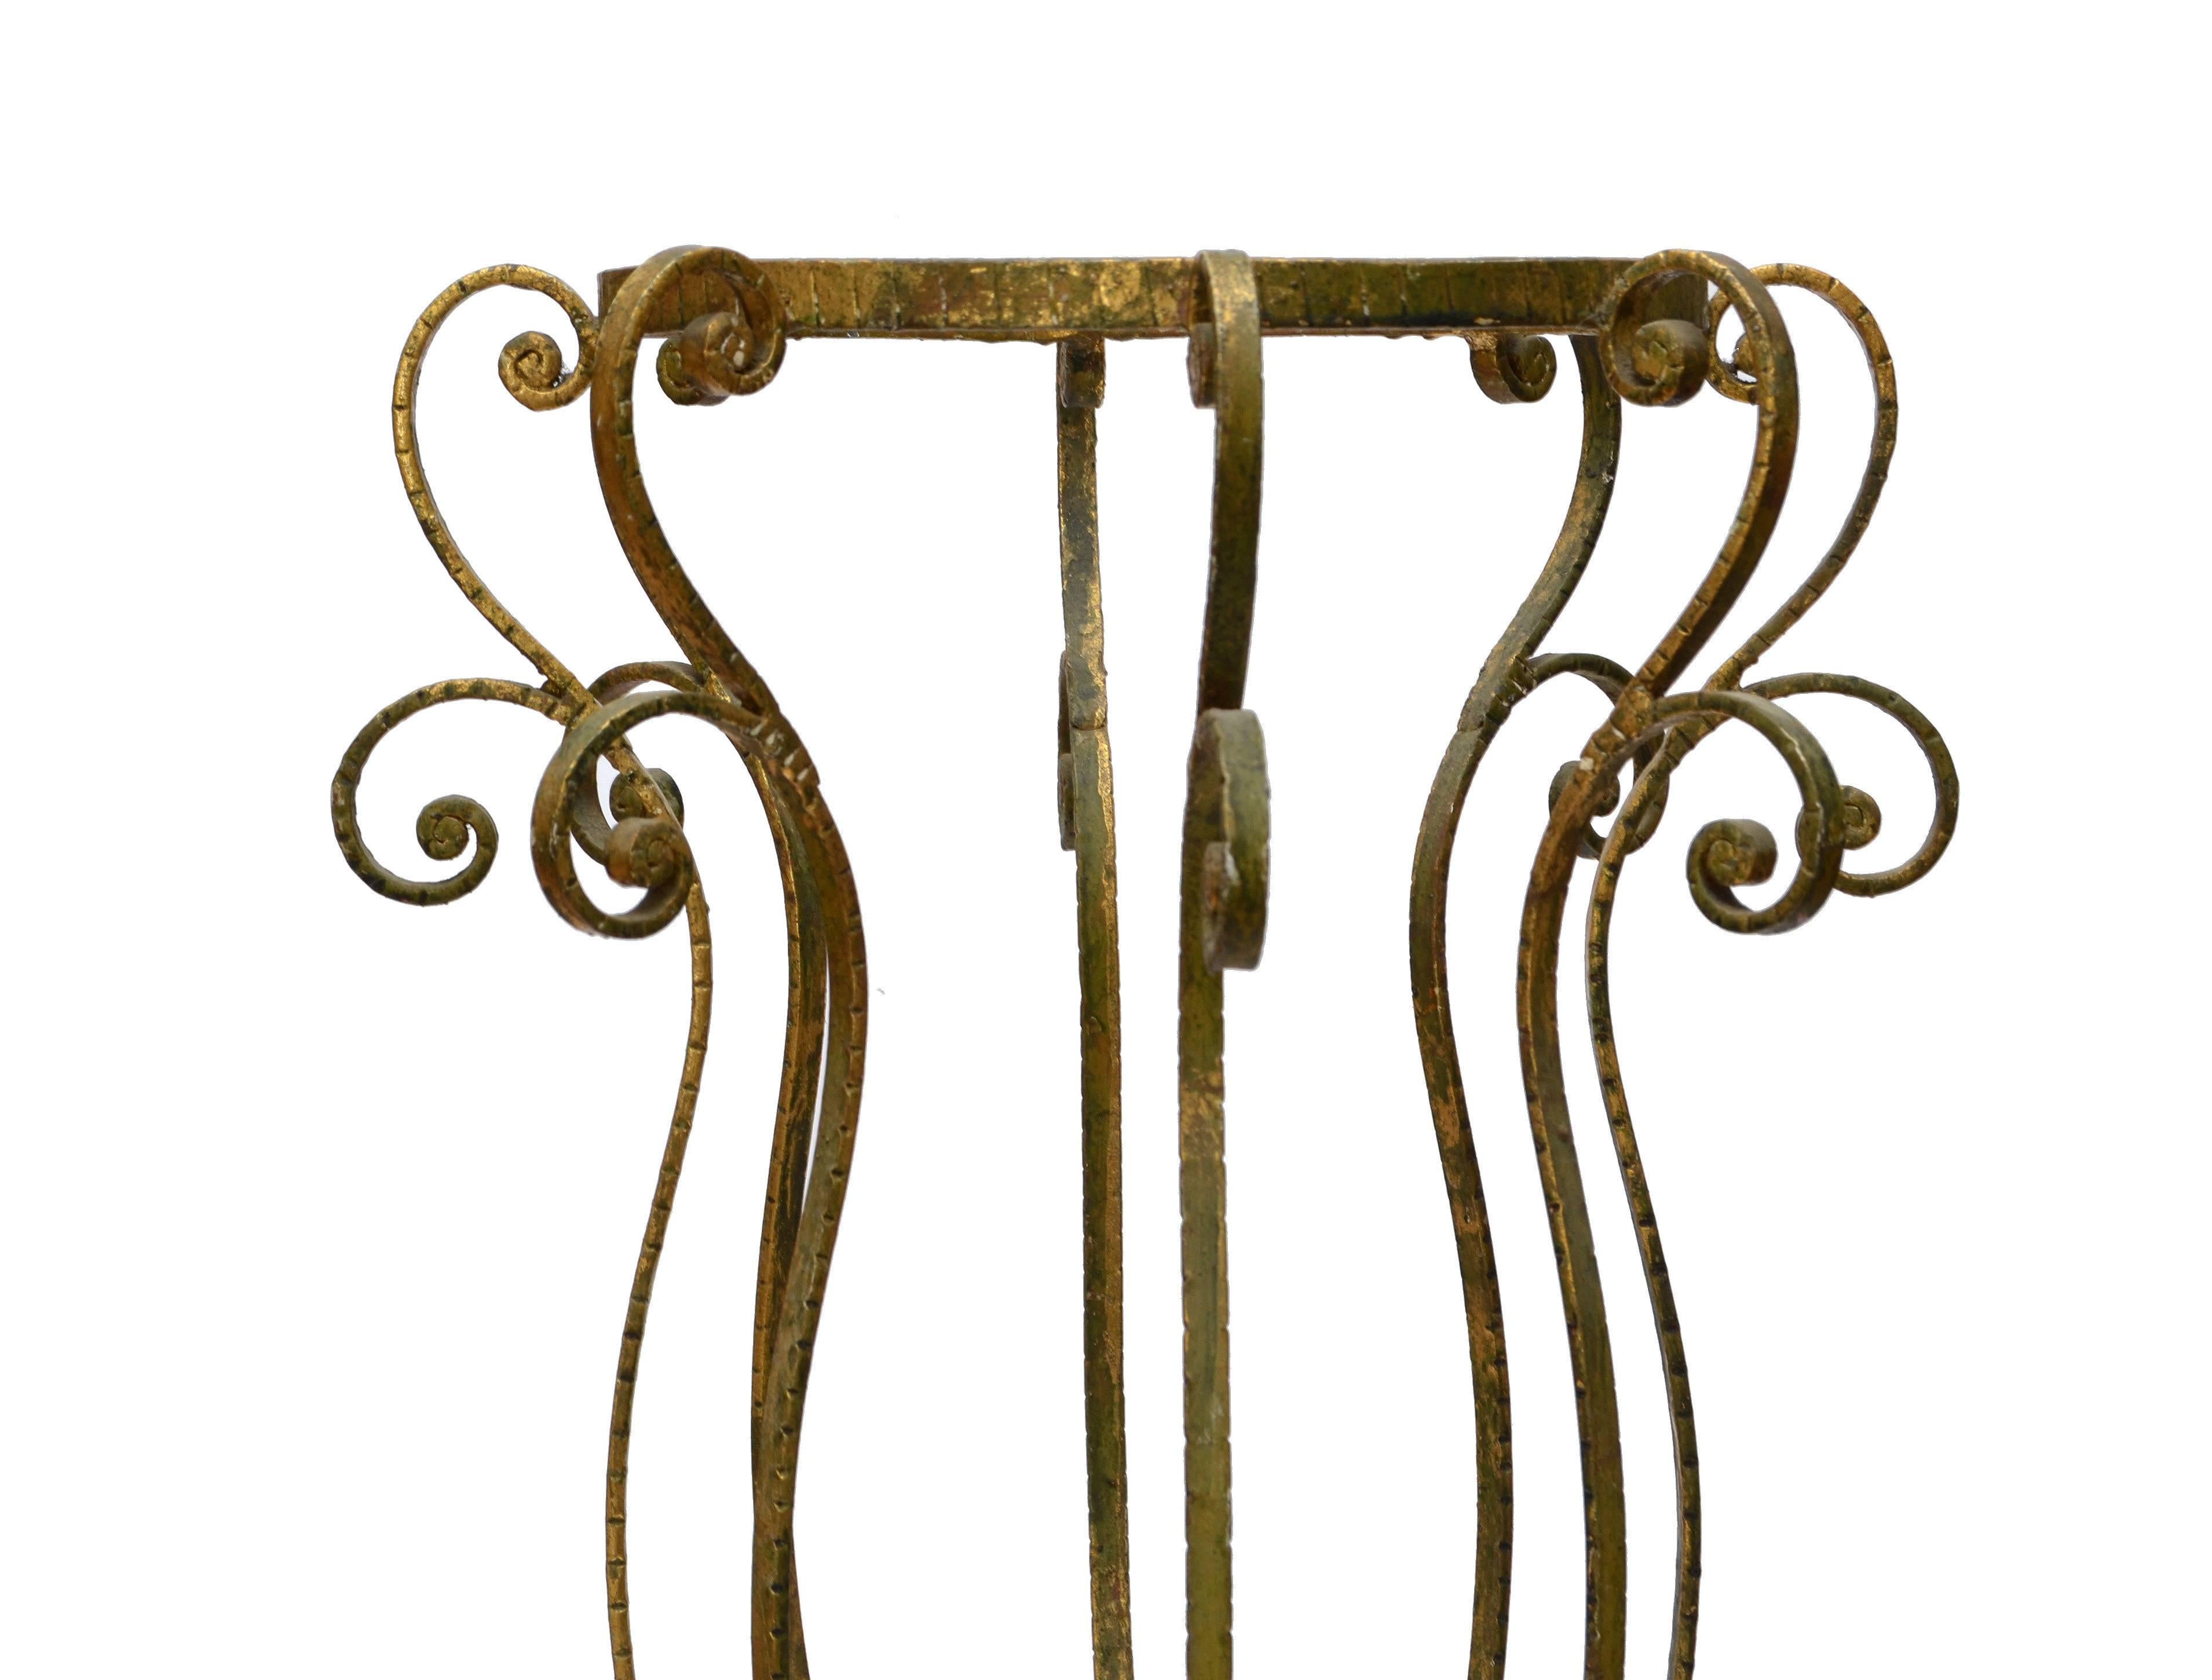 1950s Italian gold leaf hand hammered wrought iron umbrella stand by Pier Luigi Colli.  
Original vintage condition with distressed look.
We have also available in our other listings mirror, consoles, stool & chair.